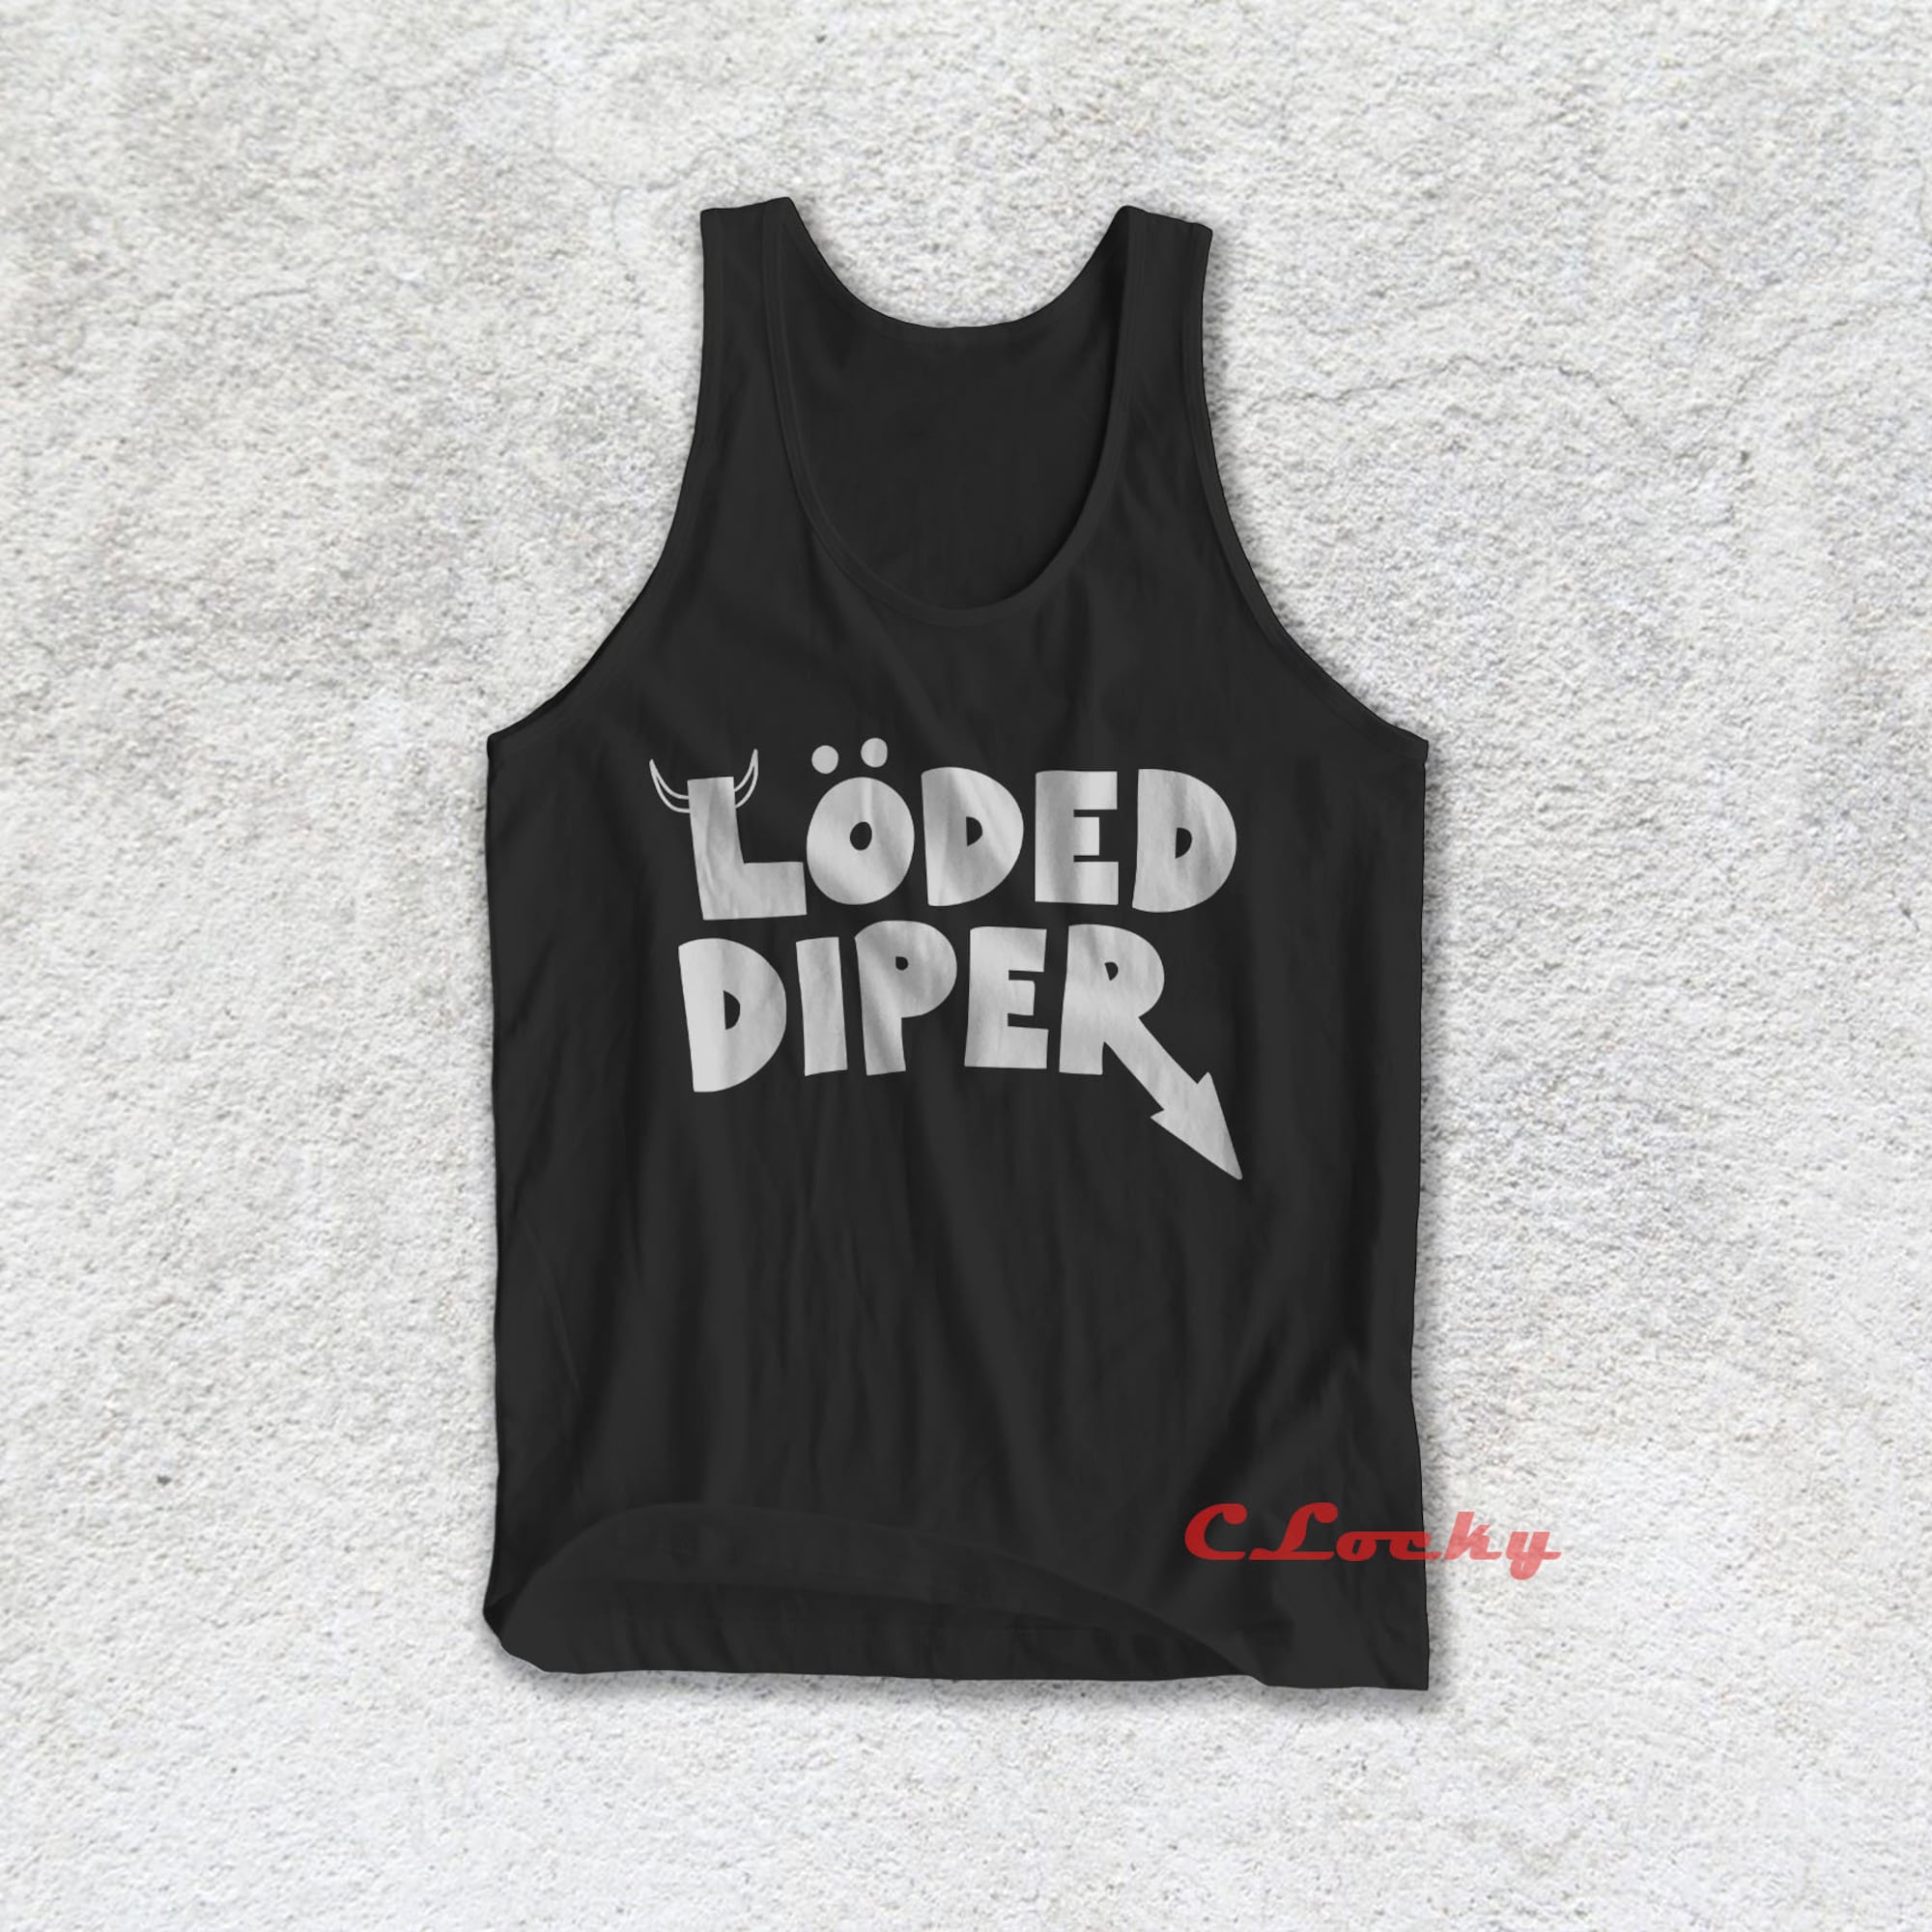 Discover Loded Diper Tank Top Rock Band Rodrick Heffley Diary of a Wimpy Kid Lded Diper Tank Top